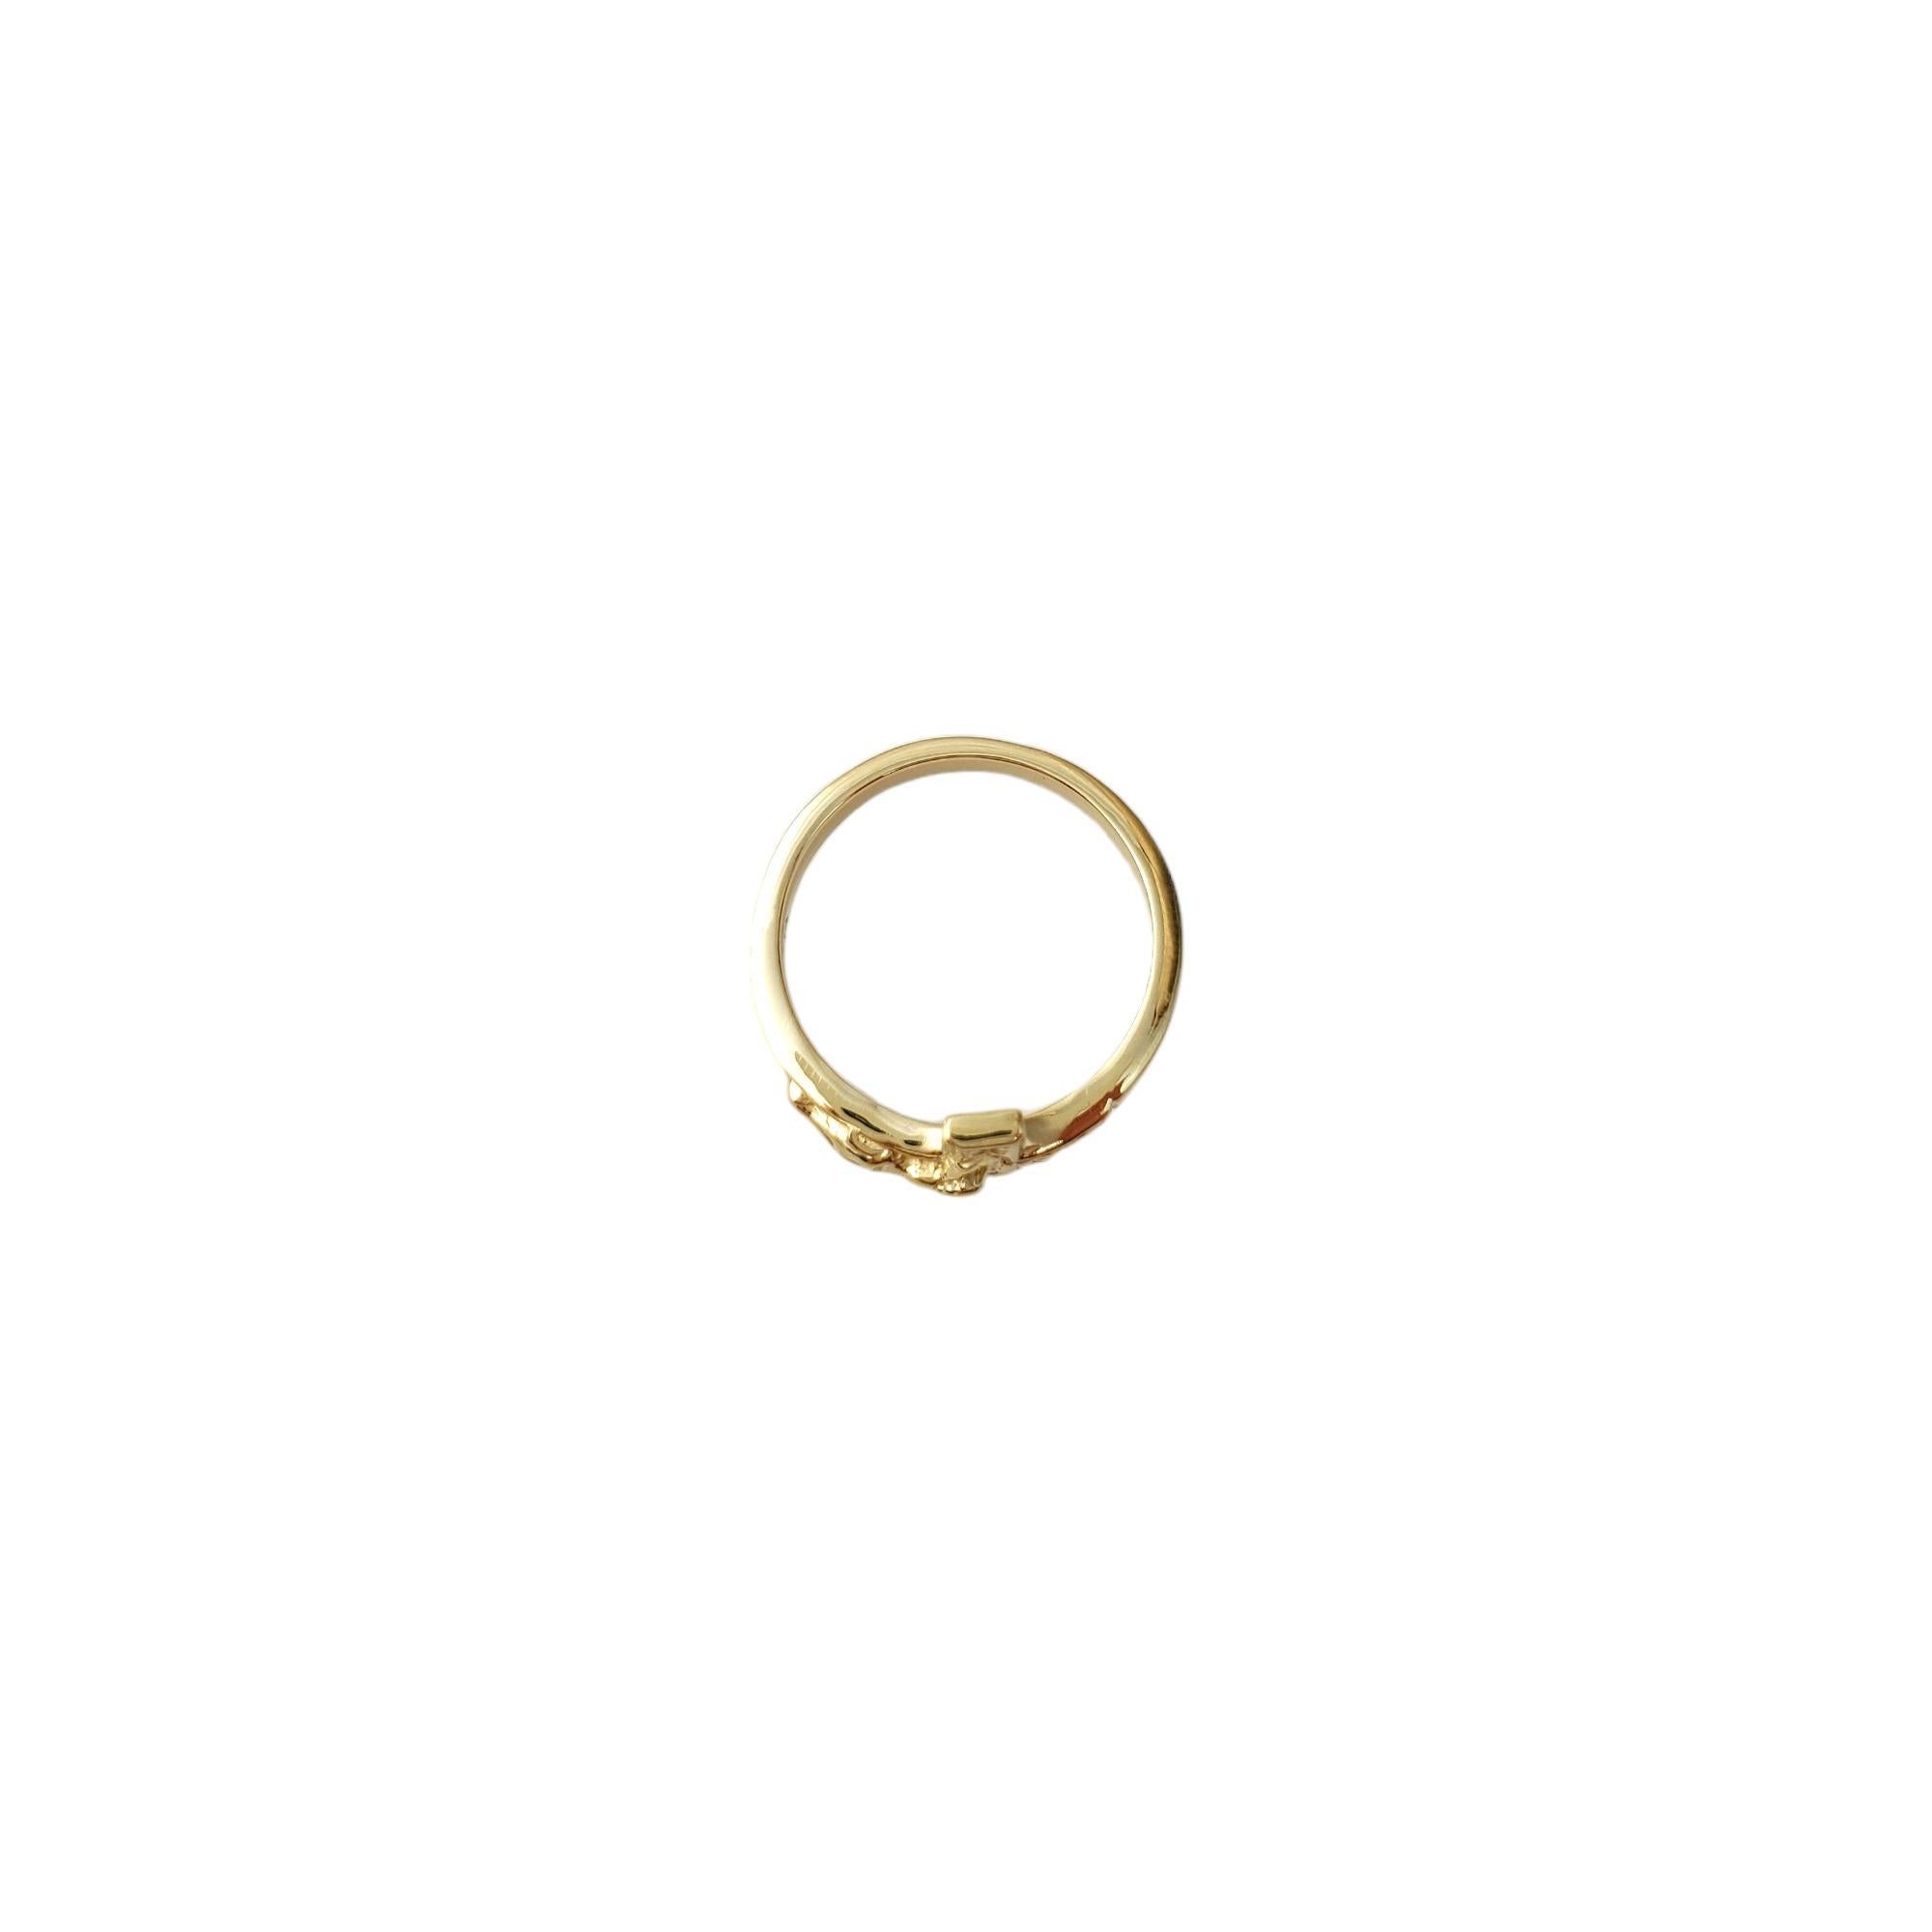 Vintage 14K Yellow Gold Crucifix Ring - 

This powerful symbol of faith is crafted in meticulously detailed 14K yellow gold. 
 
Ring Size: 5

Ring shank approx. 2mm

Weight: 1.8dwt. / 2.9 gr.

Marked: 14K

Very good condition, professionally